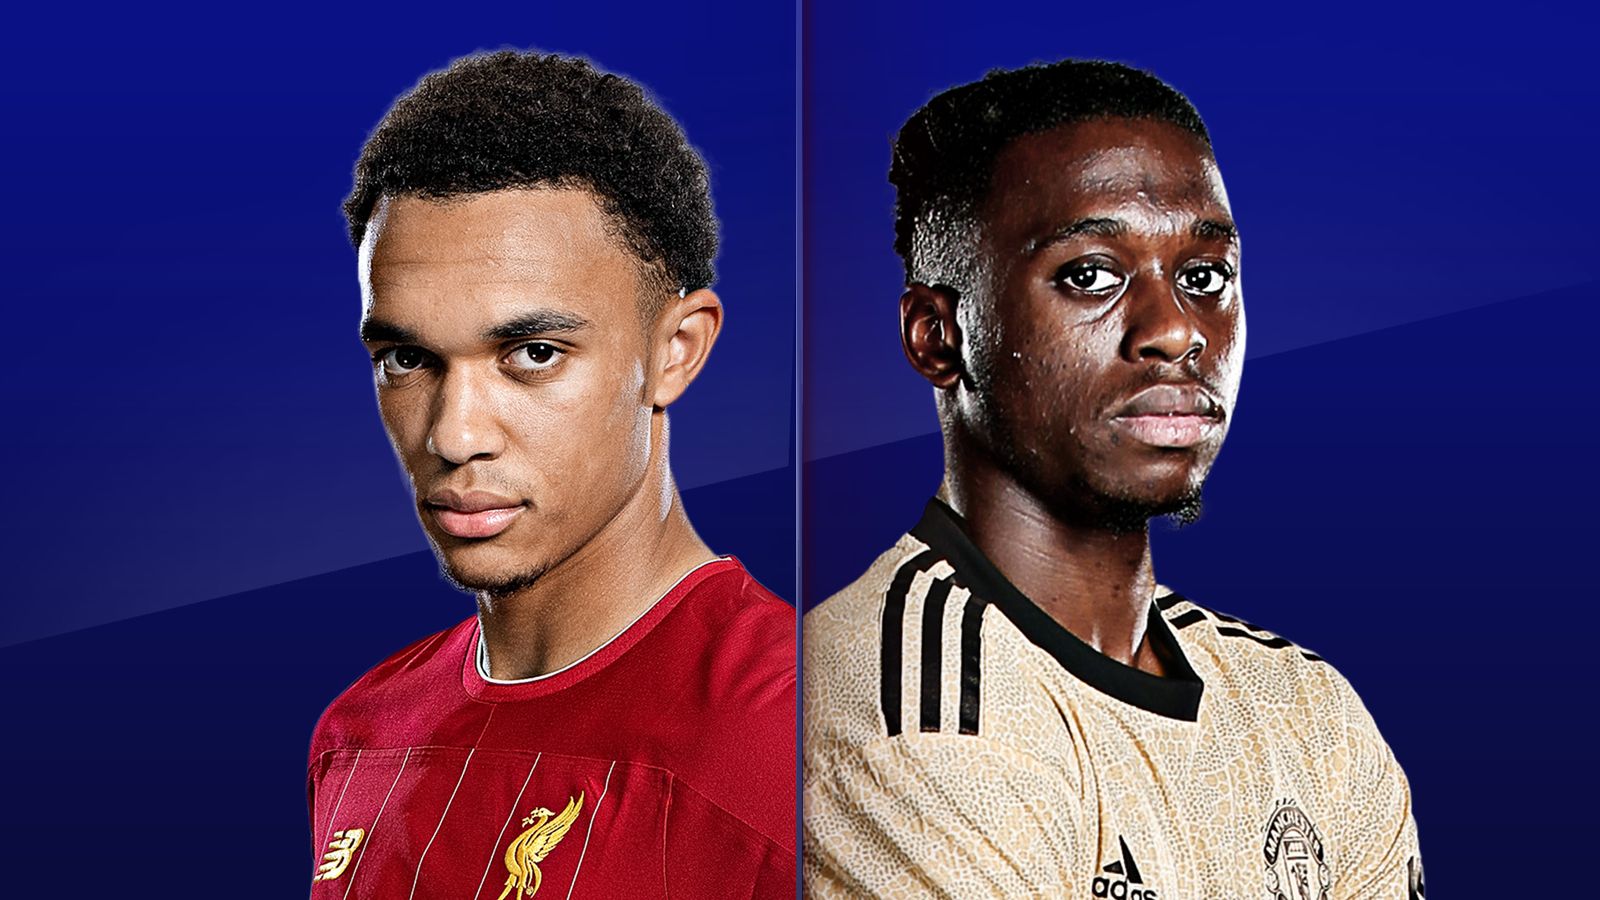 Trent Alexander-Arnold vs Aaron Wan-Bissaka: A clash of styles at the heart of an old rivalry